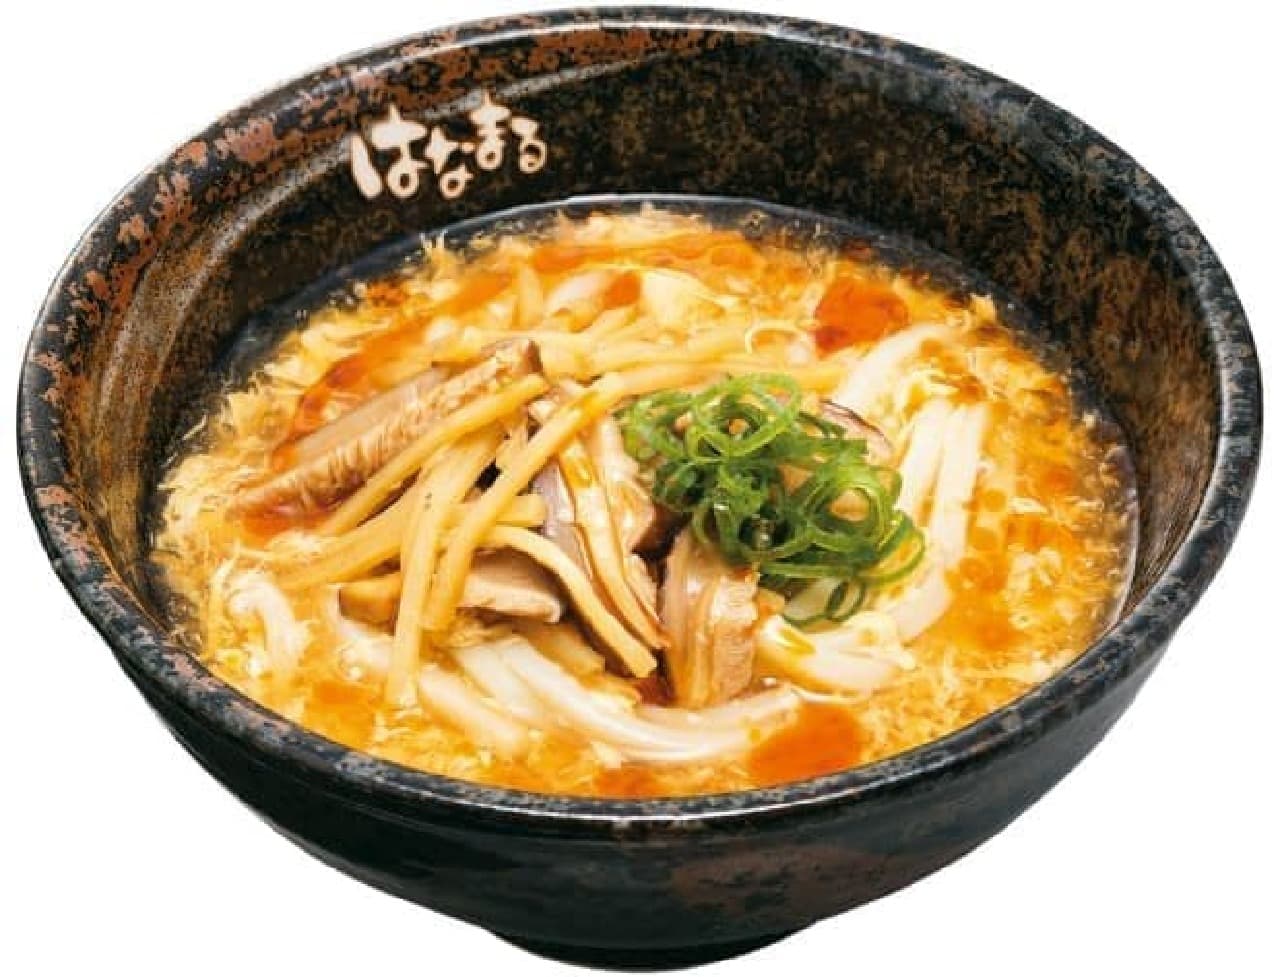 Hot and sour soup udon is based on egg ankake and topped with shiitake mushrooms, shredded bamboo shoots, and green onions.